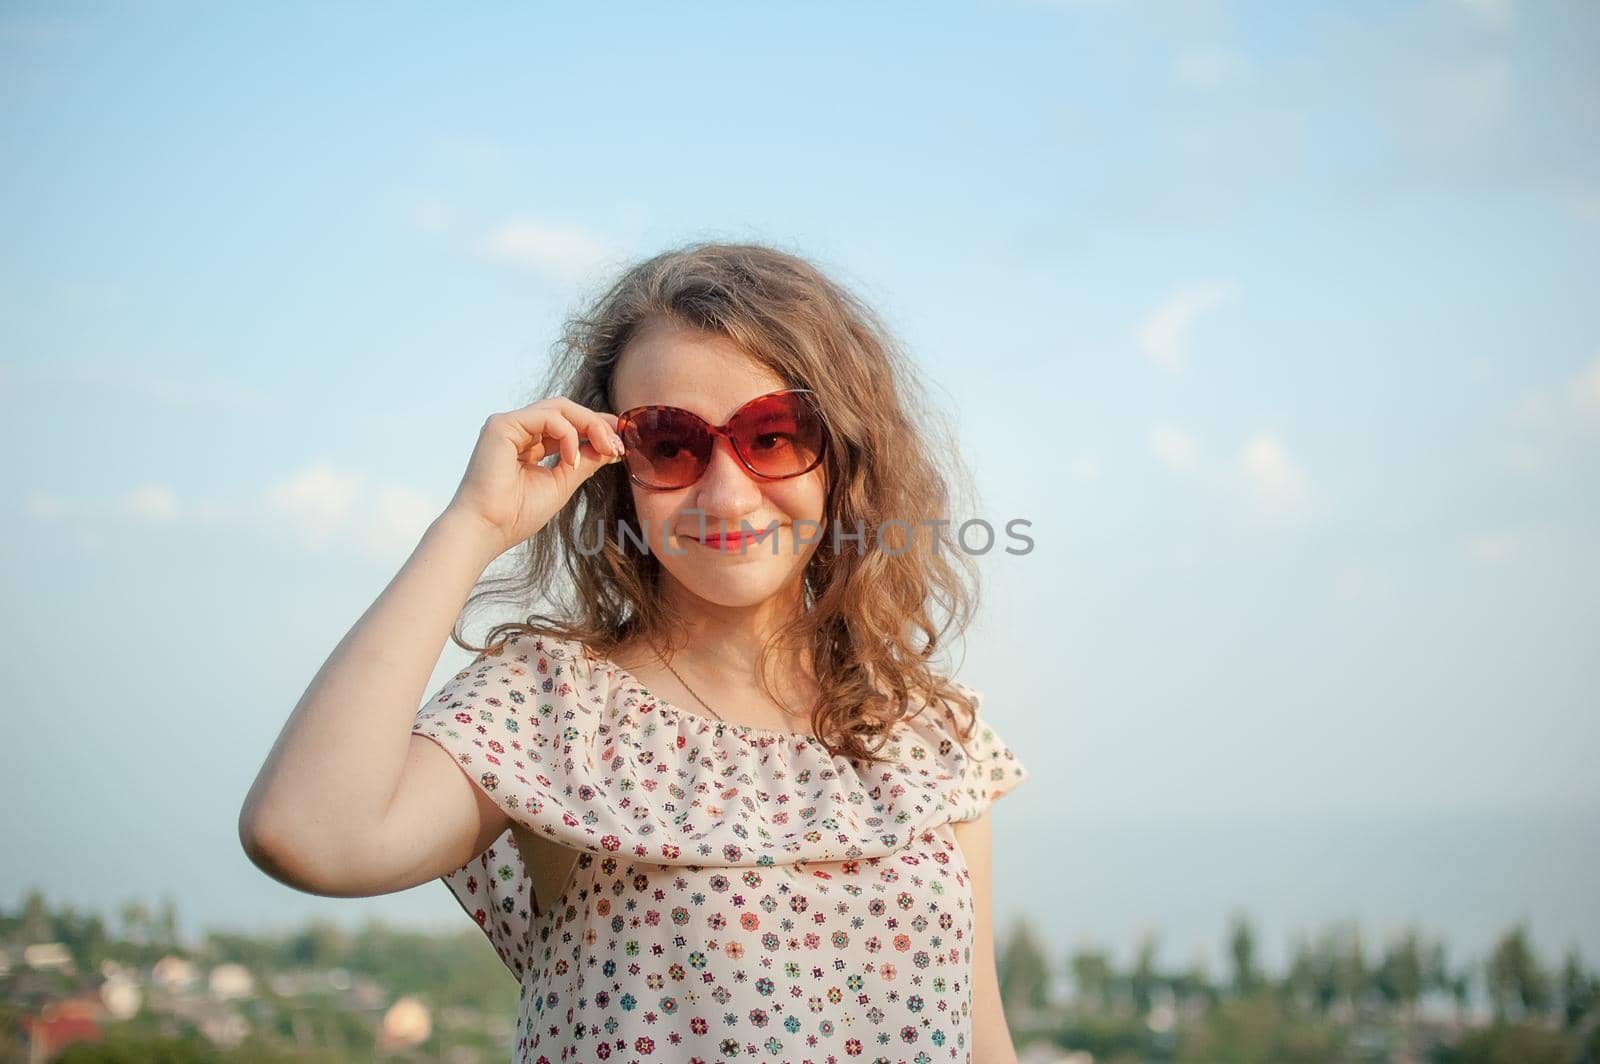 Young girl in dress is having great time during vacation in the summer on sky background in nature, travelling concept.